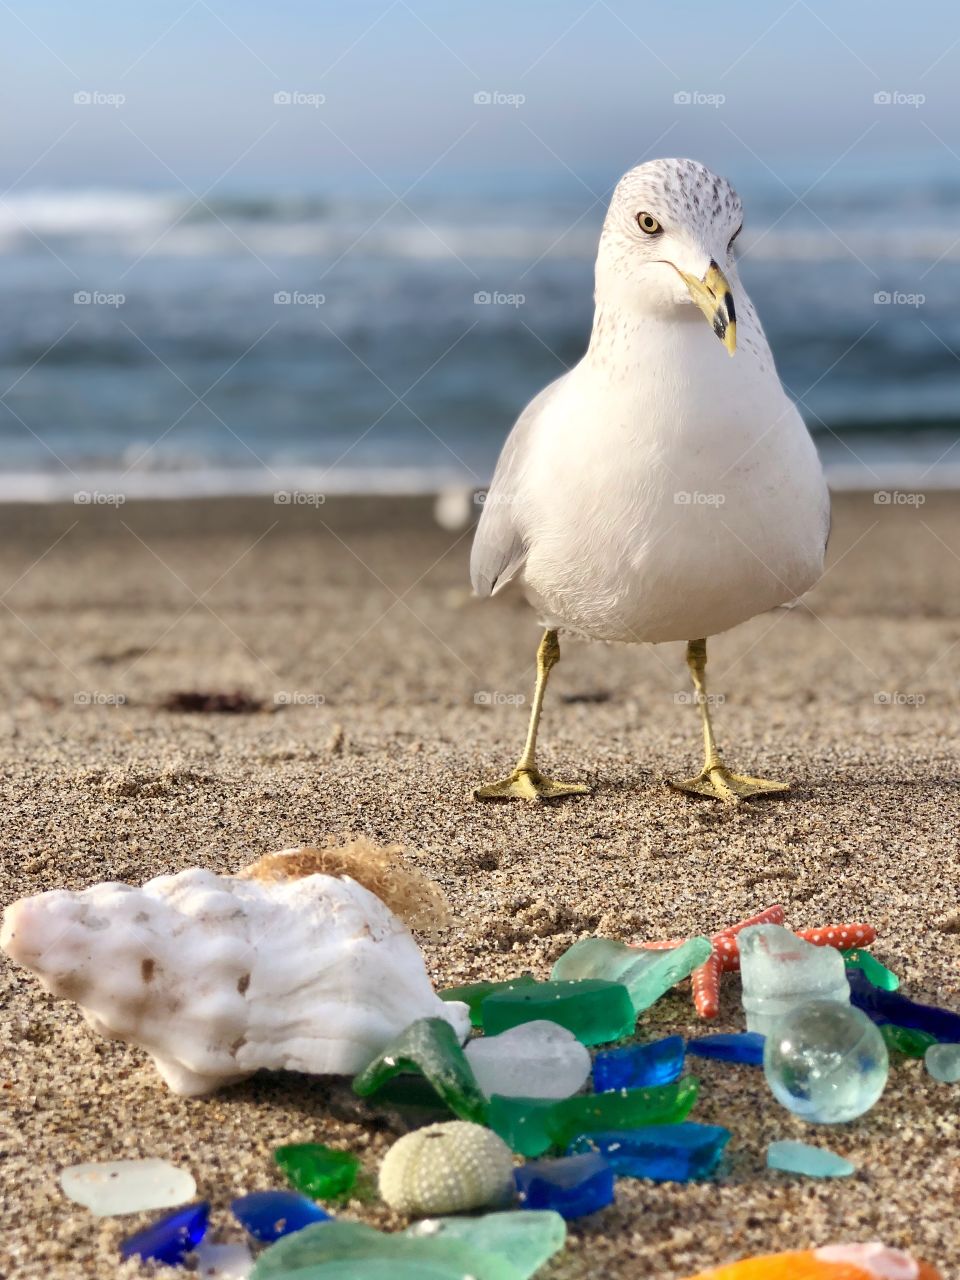 Foap Mission Color Love! Seagull In Love With The Colorful Beach Glass!